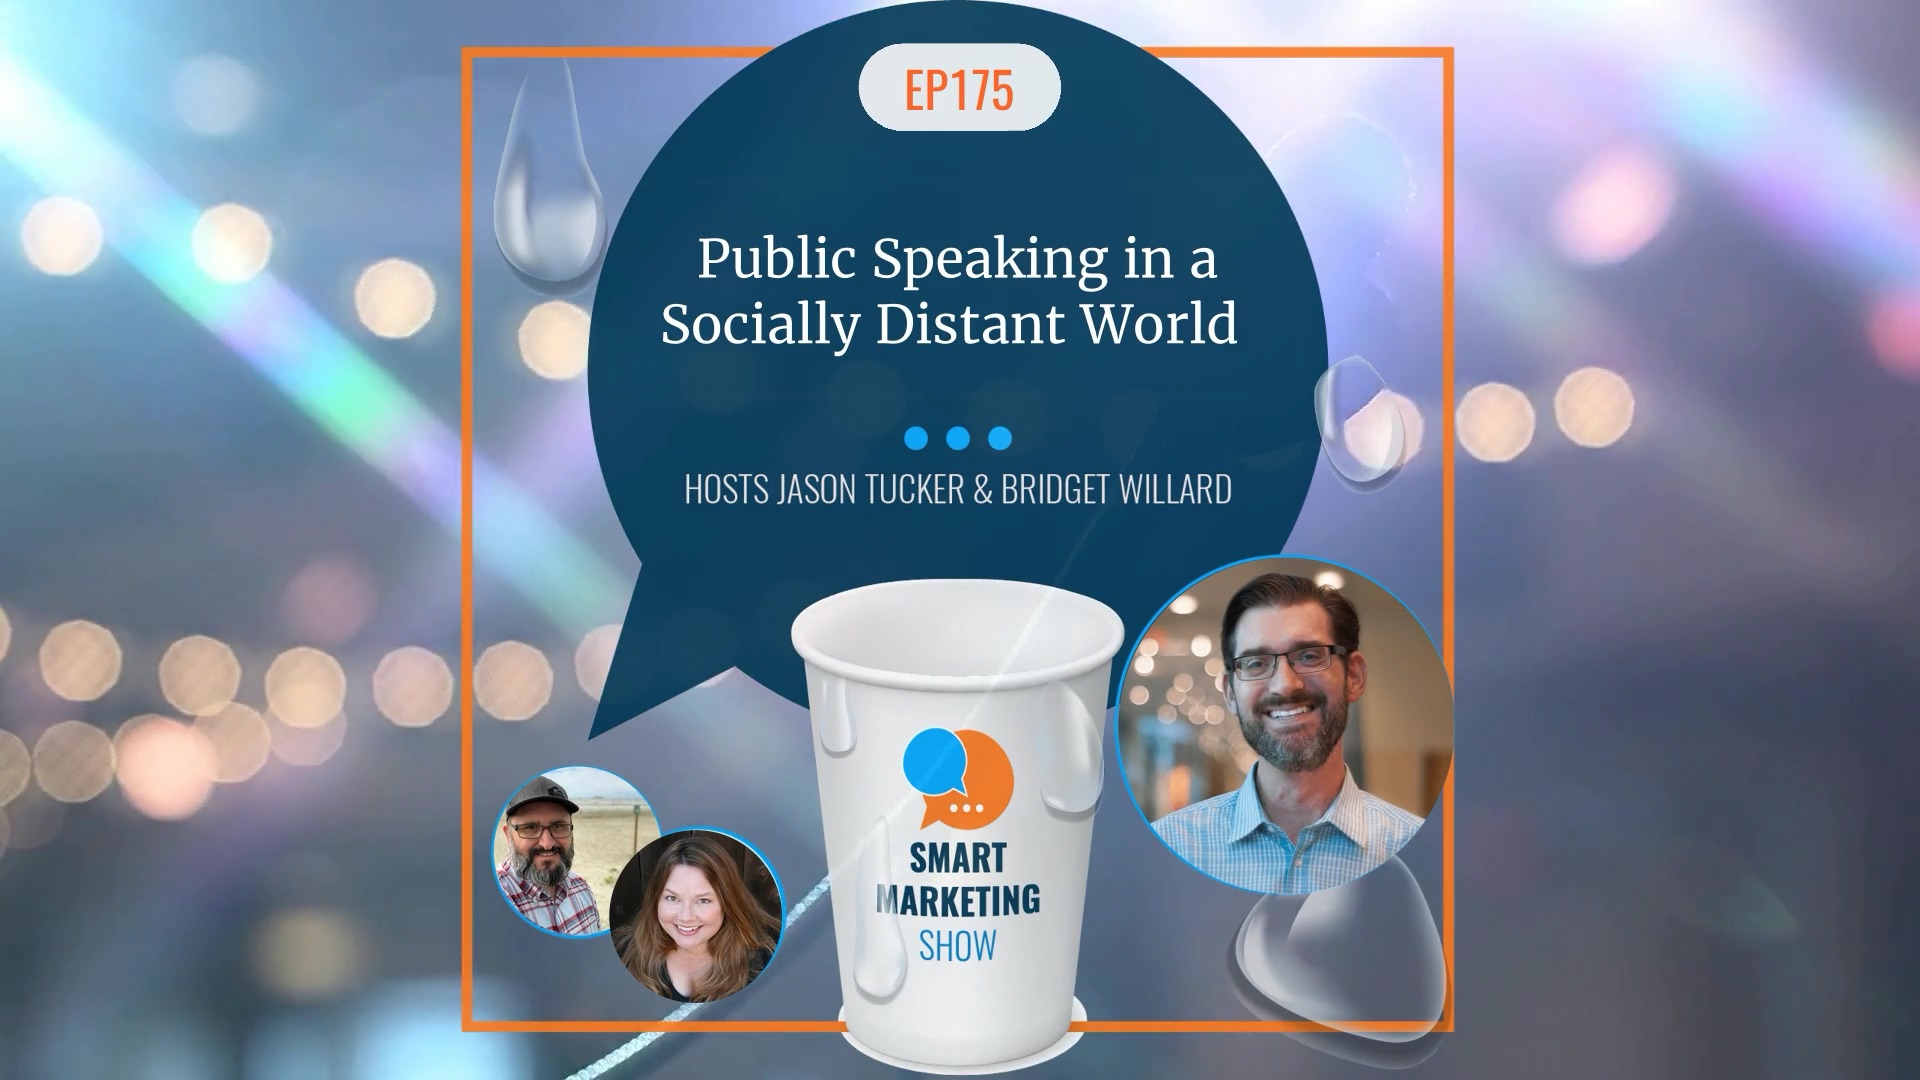 EP175 - Public Speaking in a Socially Distant World